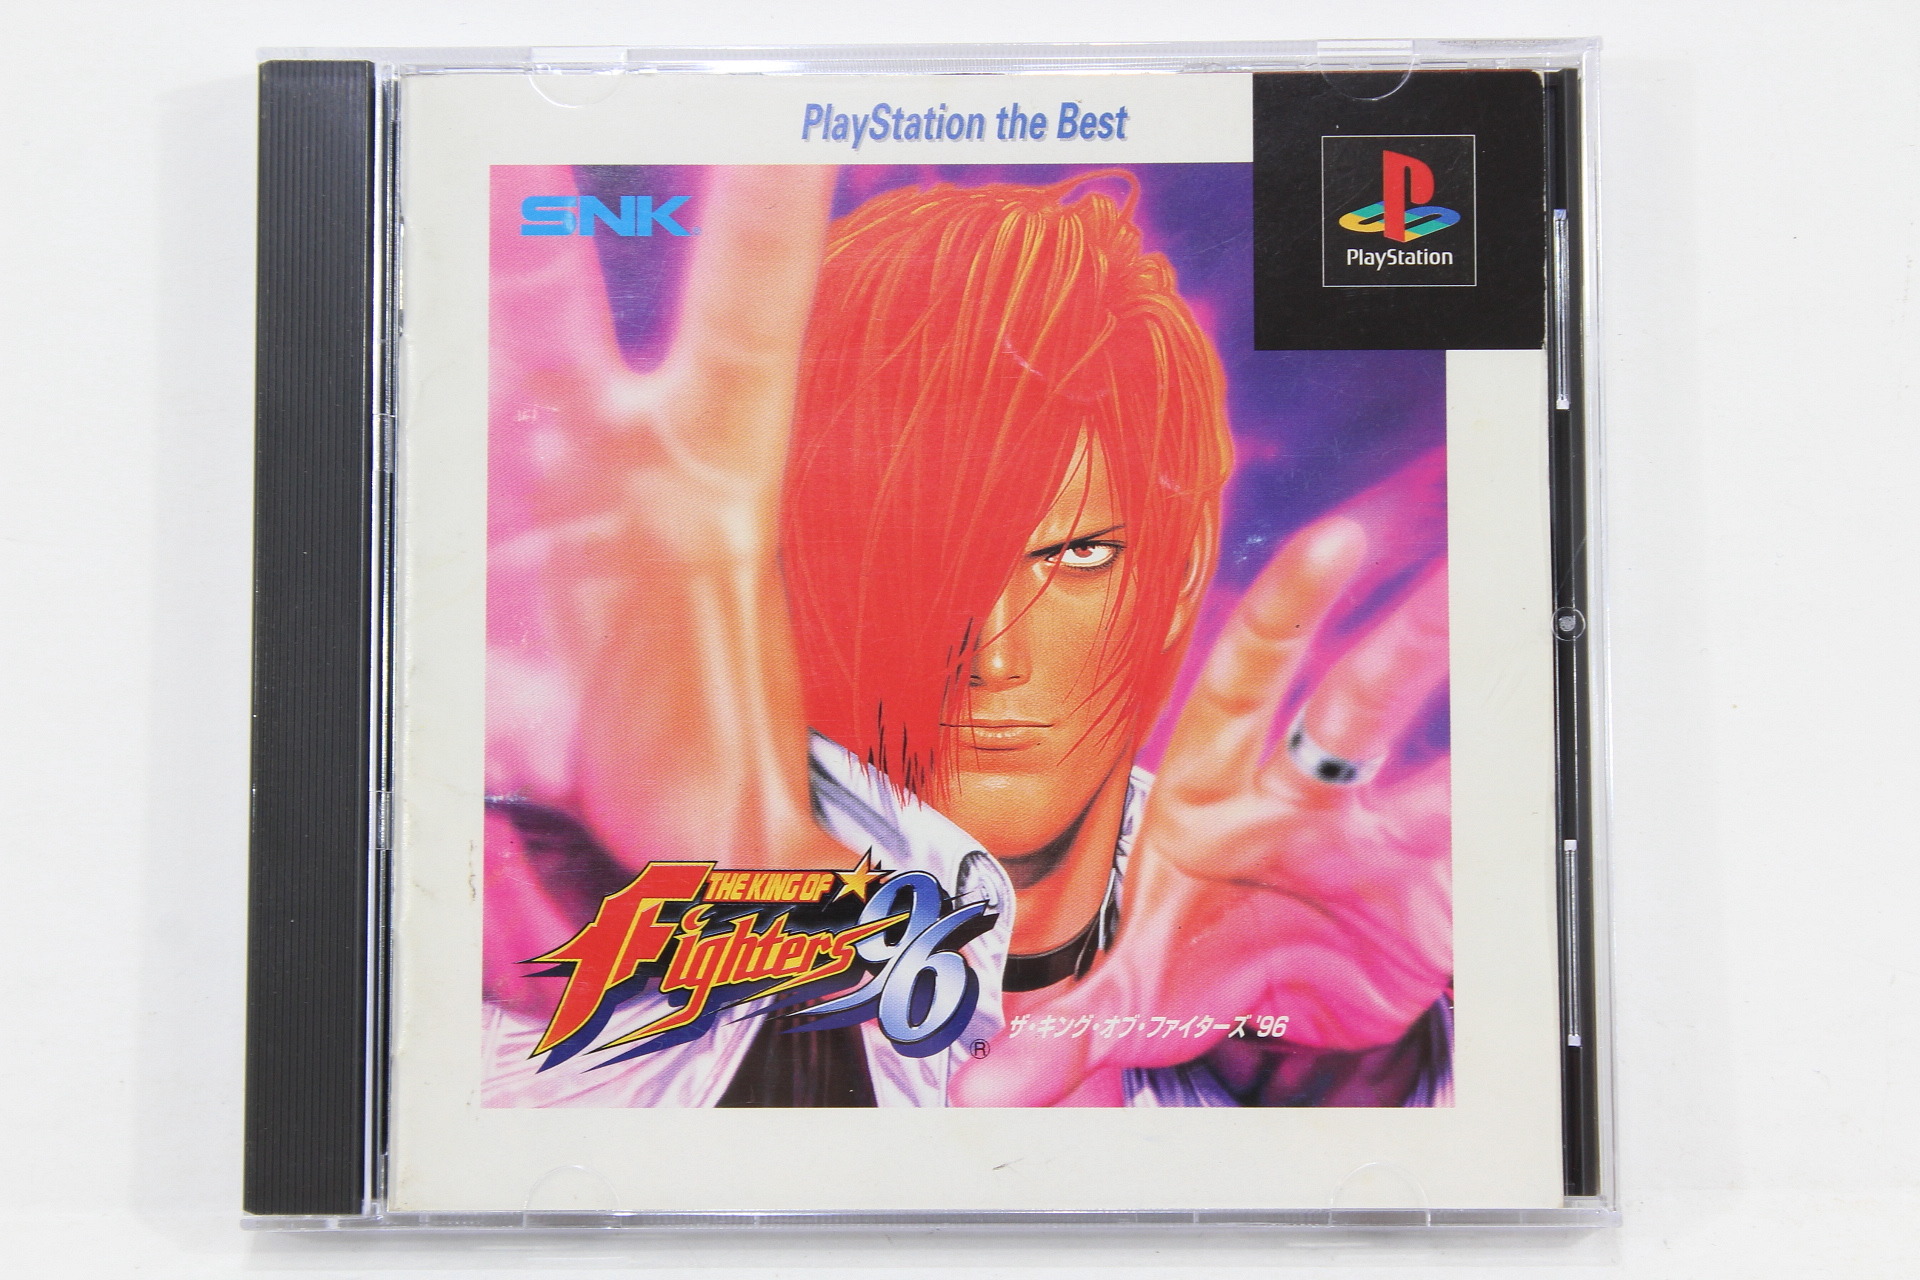 THE KING OF FIGHTERS 97 kof PS1 Playstation For JP System 9251 p1